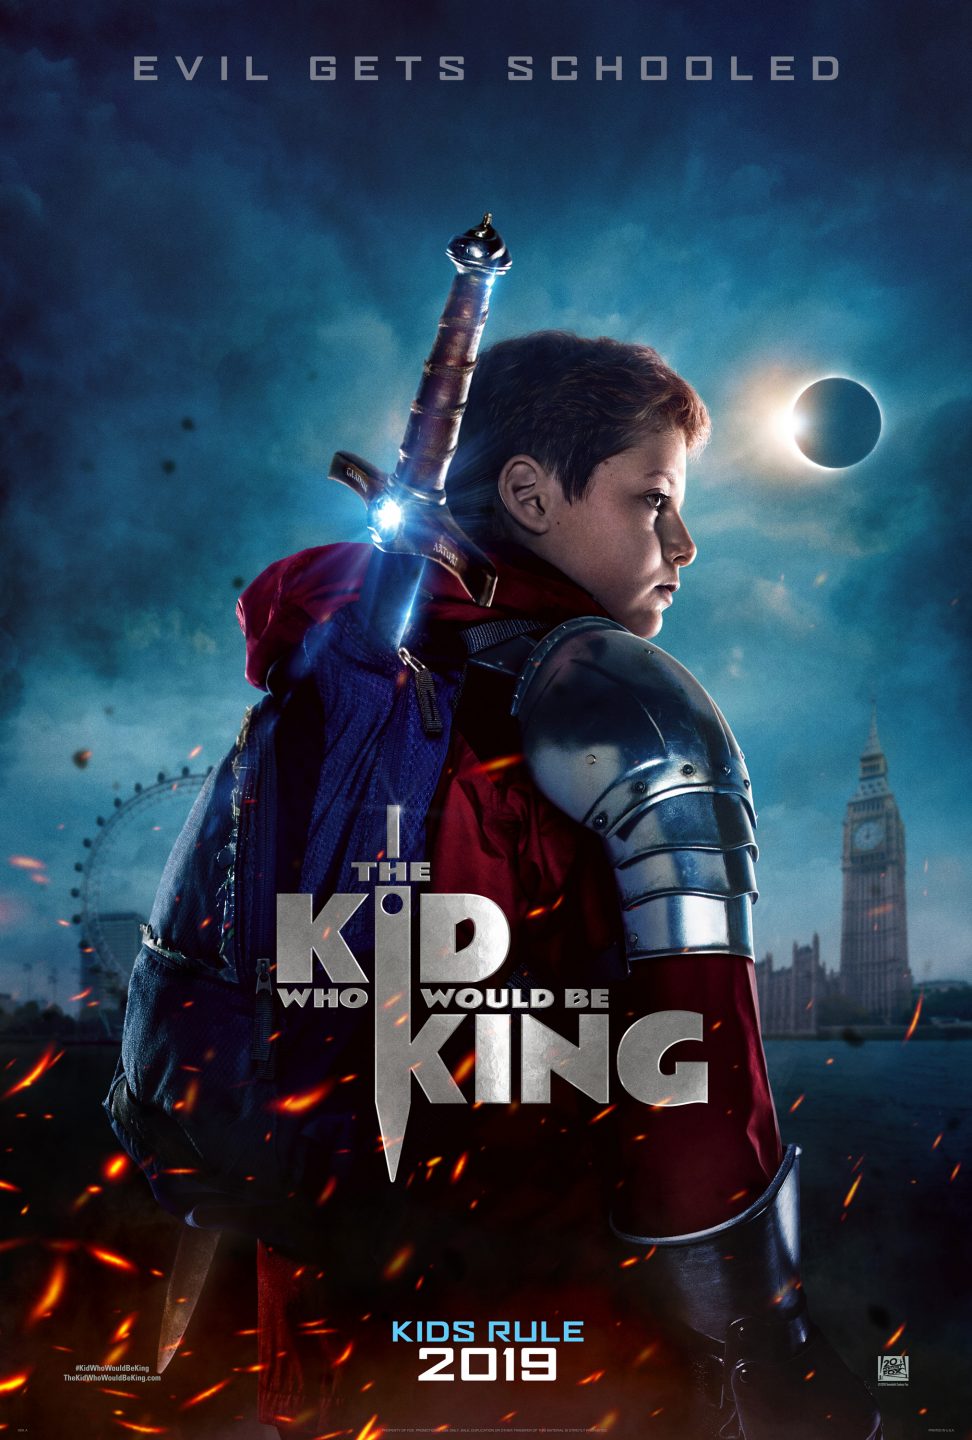 The Kid Who Would Be King poster (20th Century Fox)